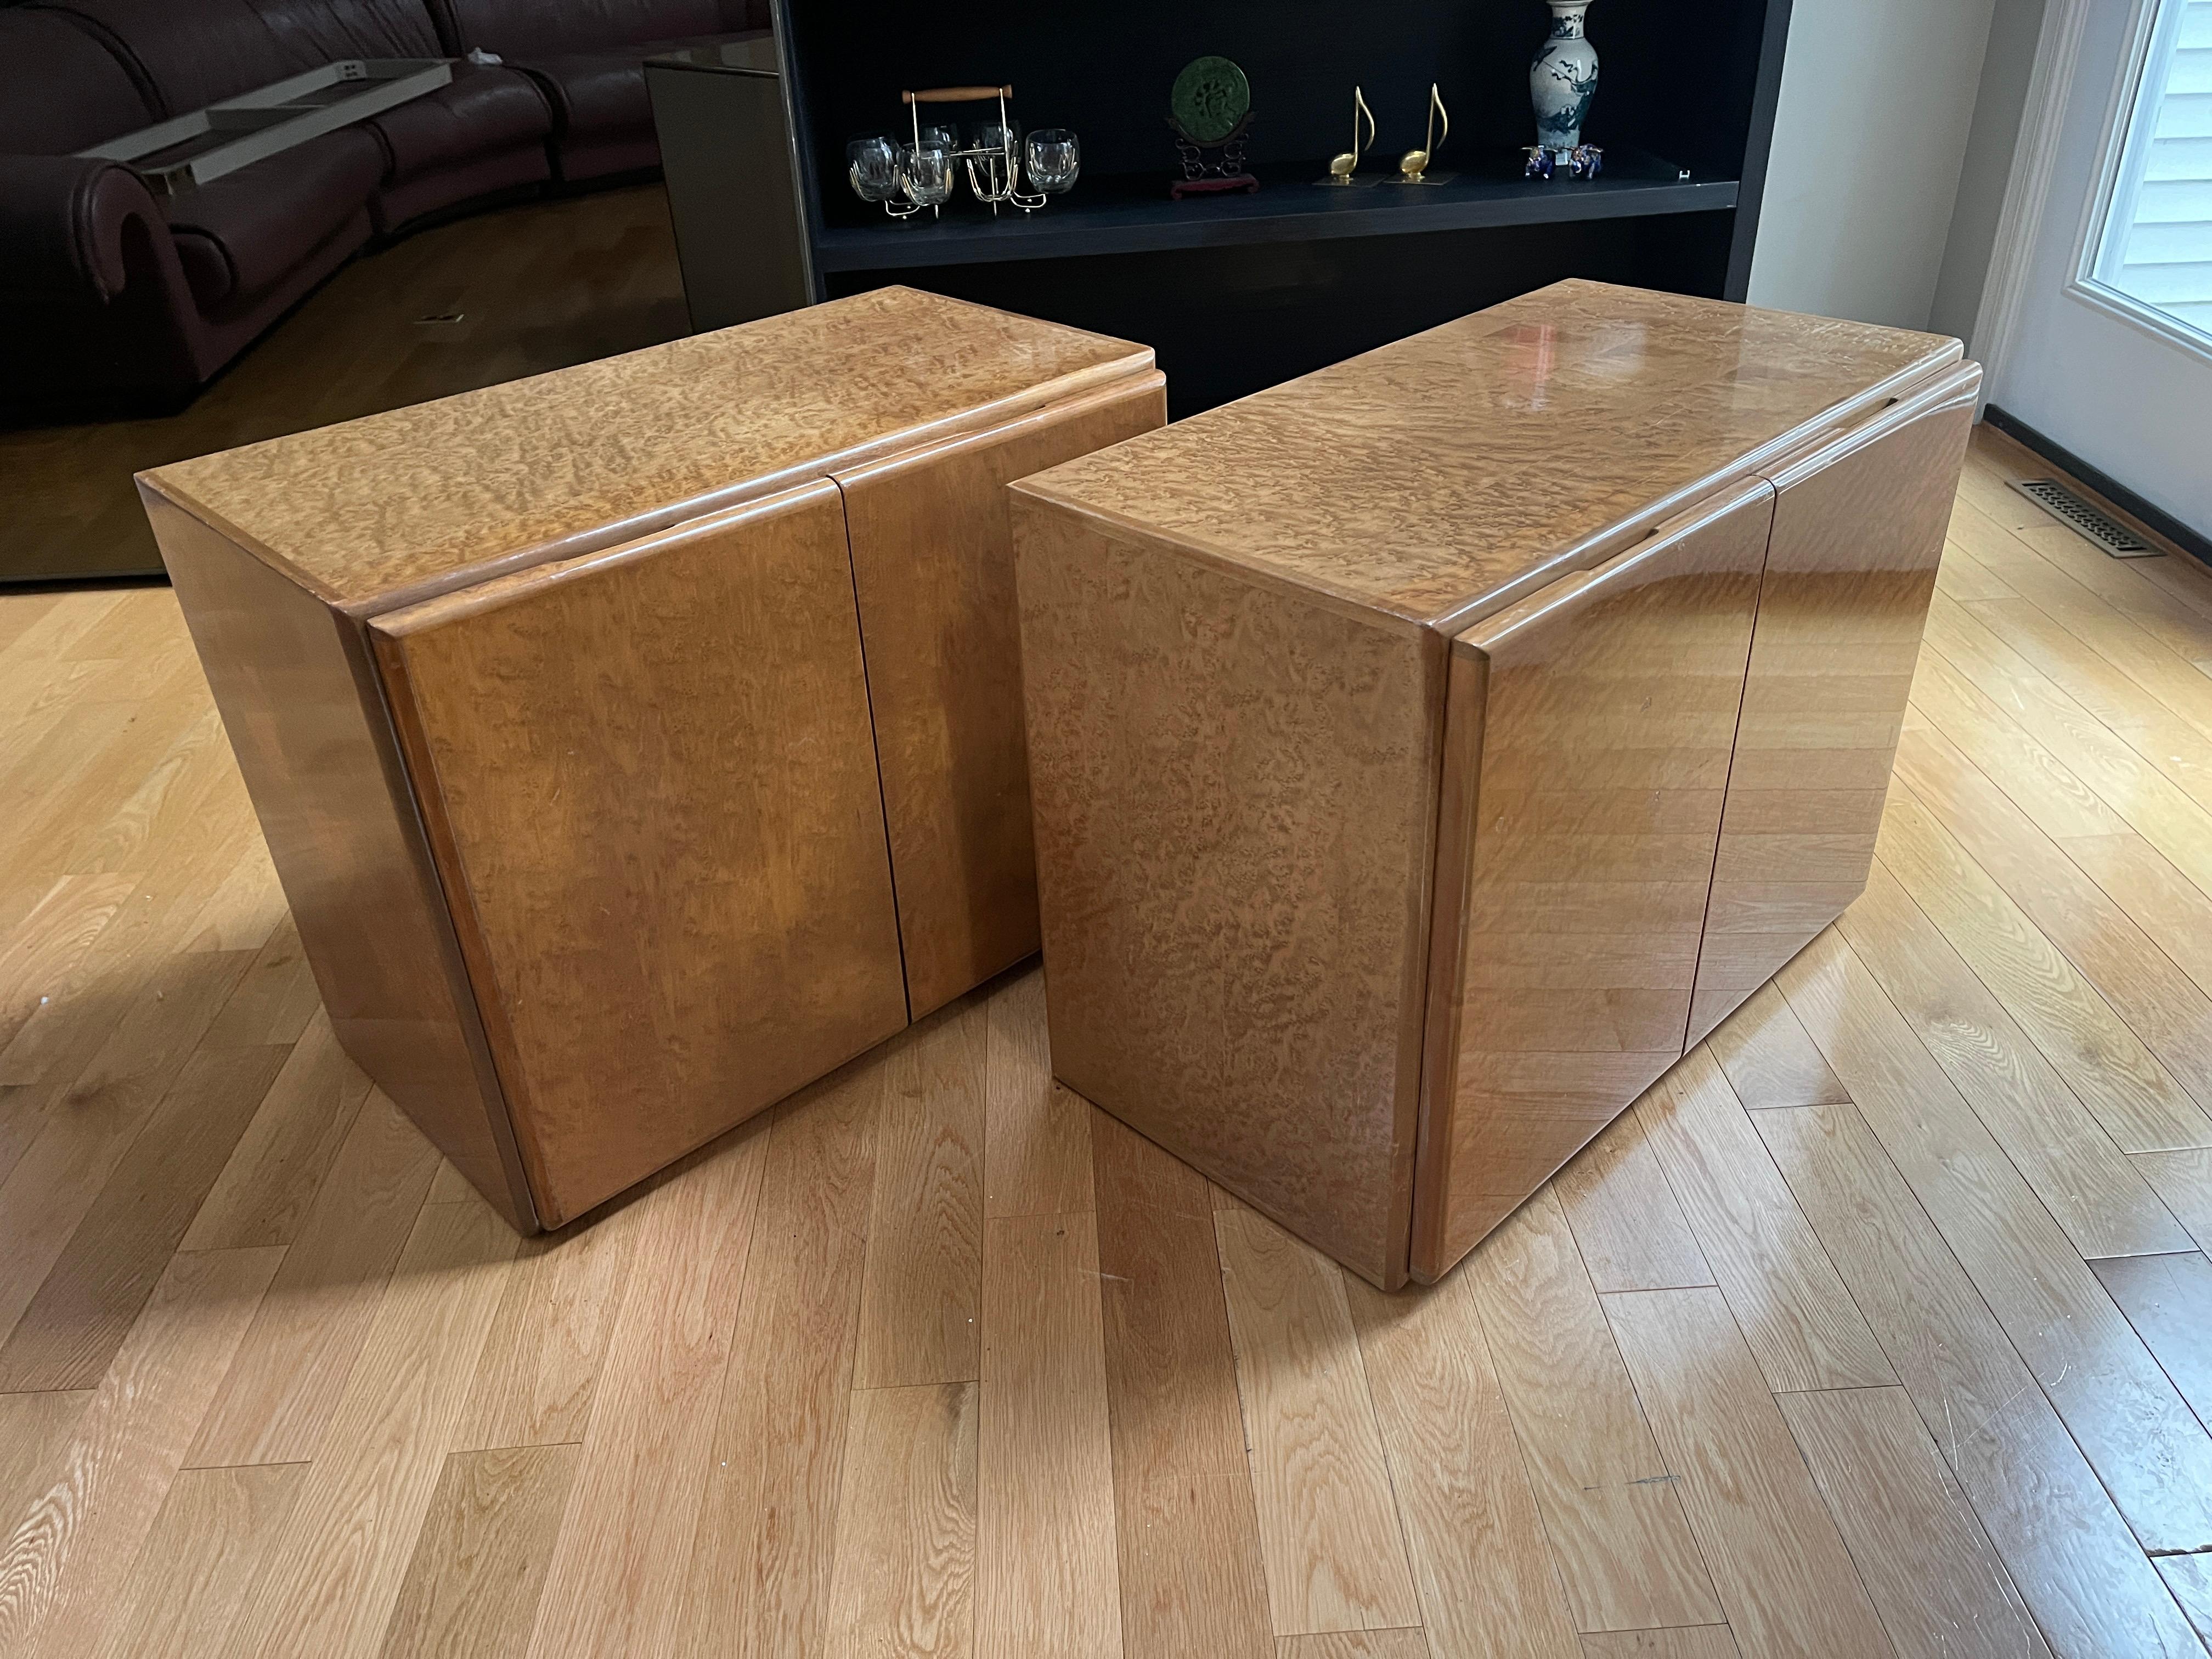 A gorgeous pair of Mid-Century Modern birdseye maple nightstands by Milo Baughman for Thayer Coggin. May be placed on gold plinth base should you wish to use as a credenza.